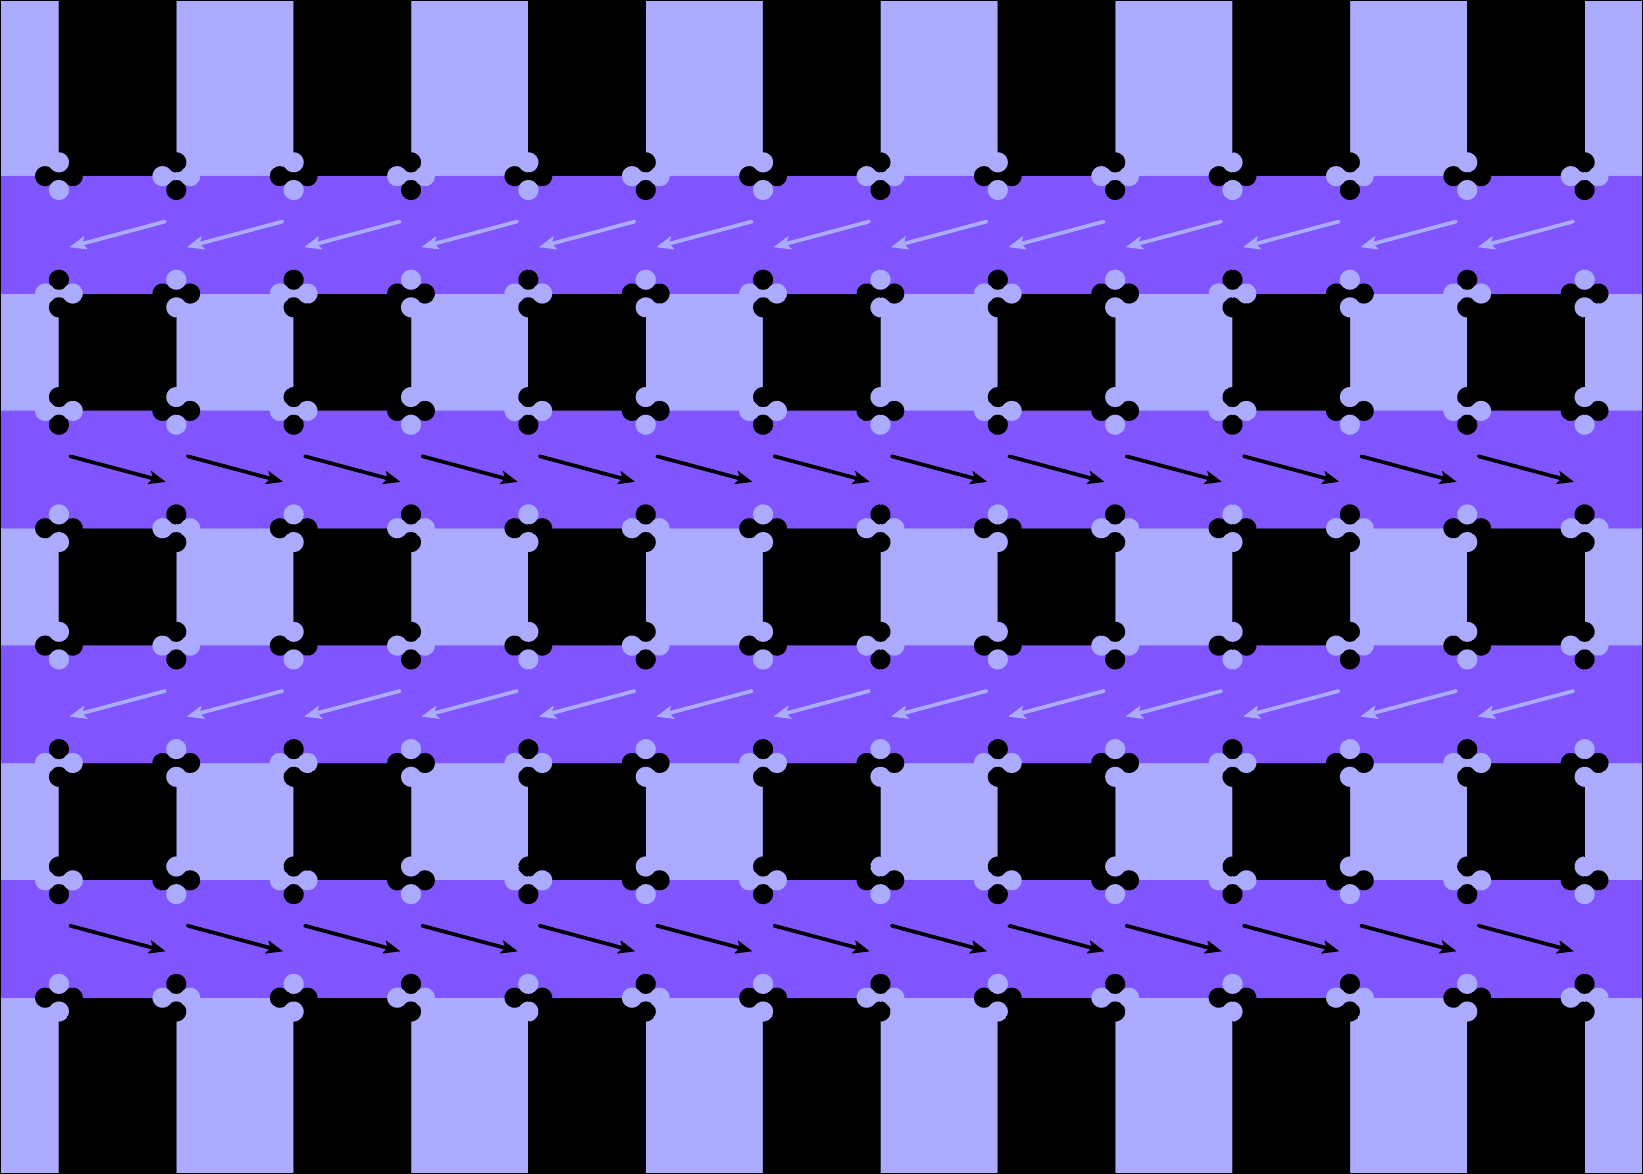 white checker square or dot on top